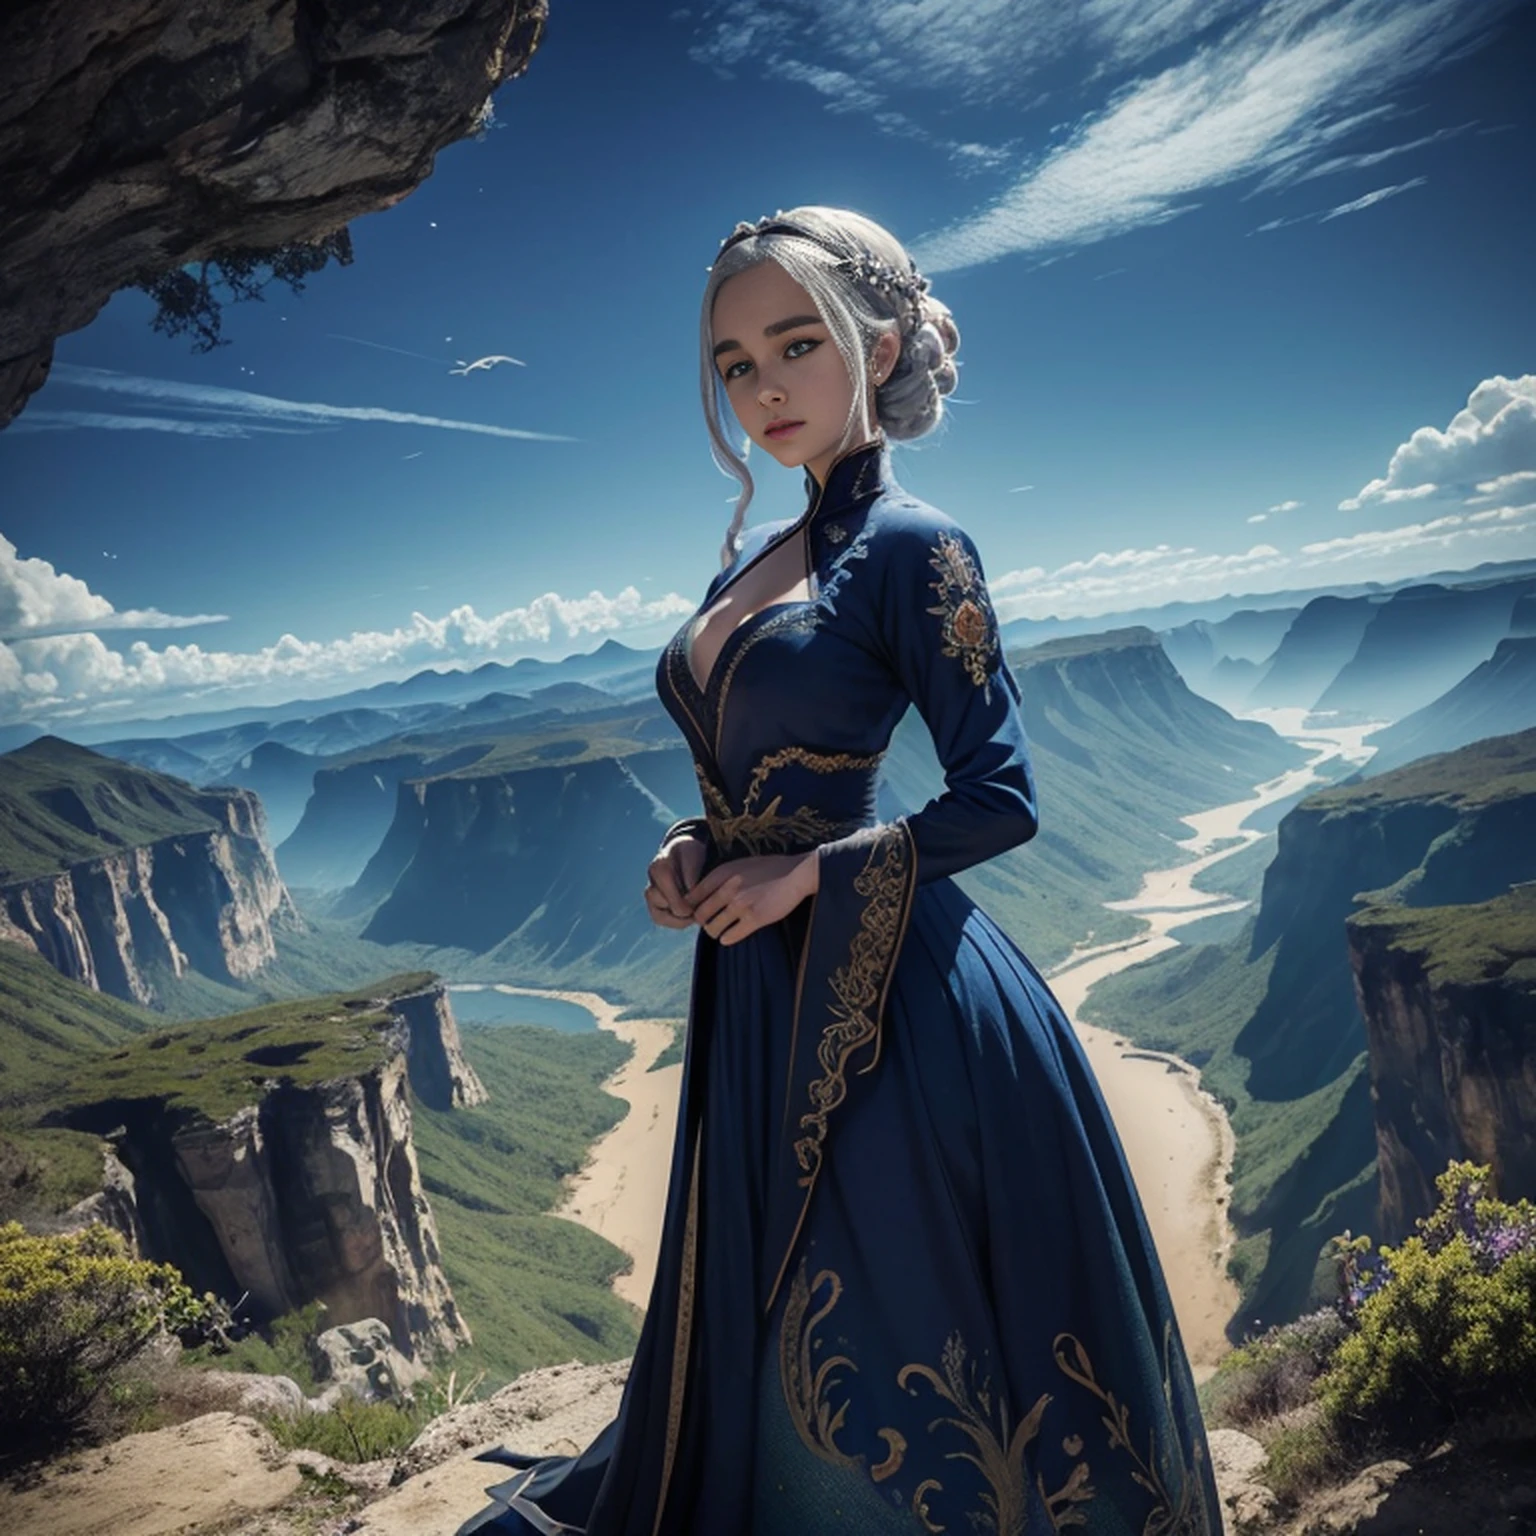 ((best qualityer)), ((Masterpiece artwork)), (detailded), Empress Dragon "Emilia Clarke", realisticeyes, Bblack hair, blue colored eyes, breasts small, ful dressed de setin koreano sensual, evil landscape, ethereal beauty, (Fantasy Illustration:1.3), lovely gaze, captivating pose, solo girl, supernatural charm, mystical sky, moonlit night, subdued colors, (detailed cloudscape:1.3), (high resolution:1.2) (Blue dragon flying in the sky) ful dressed, over a hill, An army passing far into a canyon below.